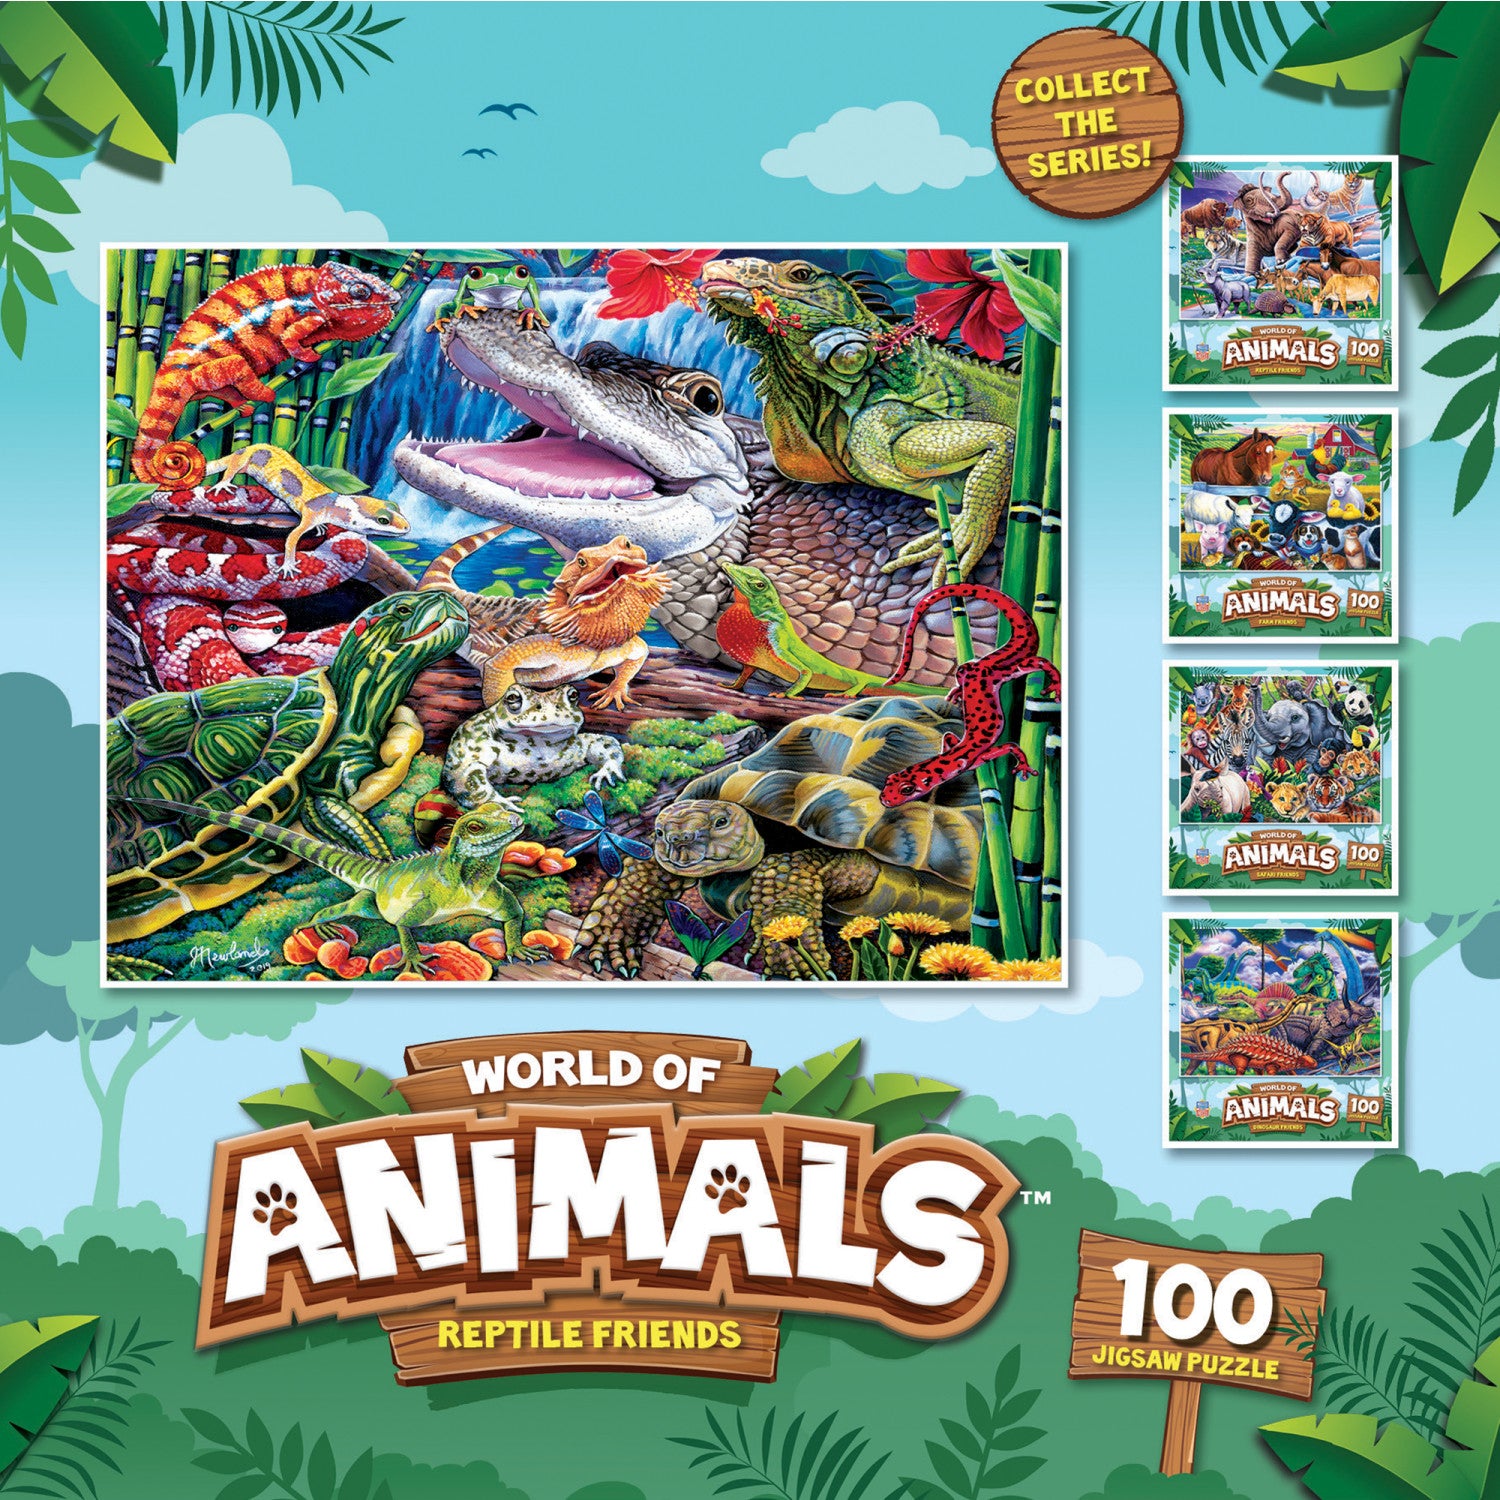 World of Animals - Reptile Friends 100 Piece Jigsaw Puzzle